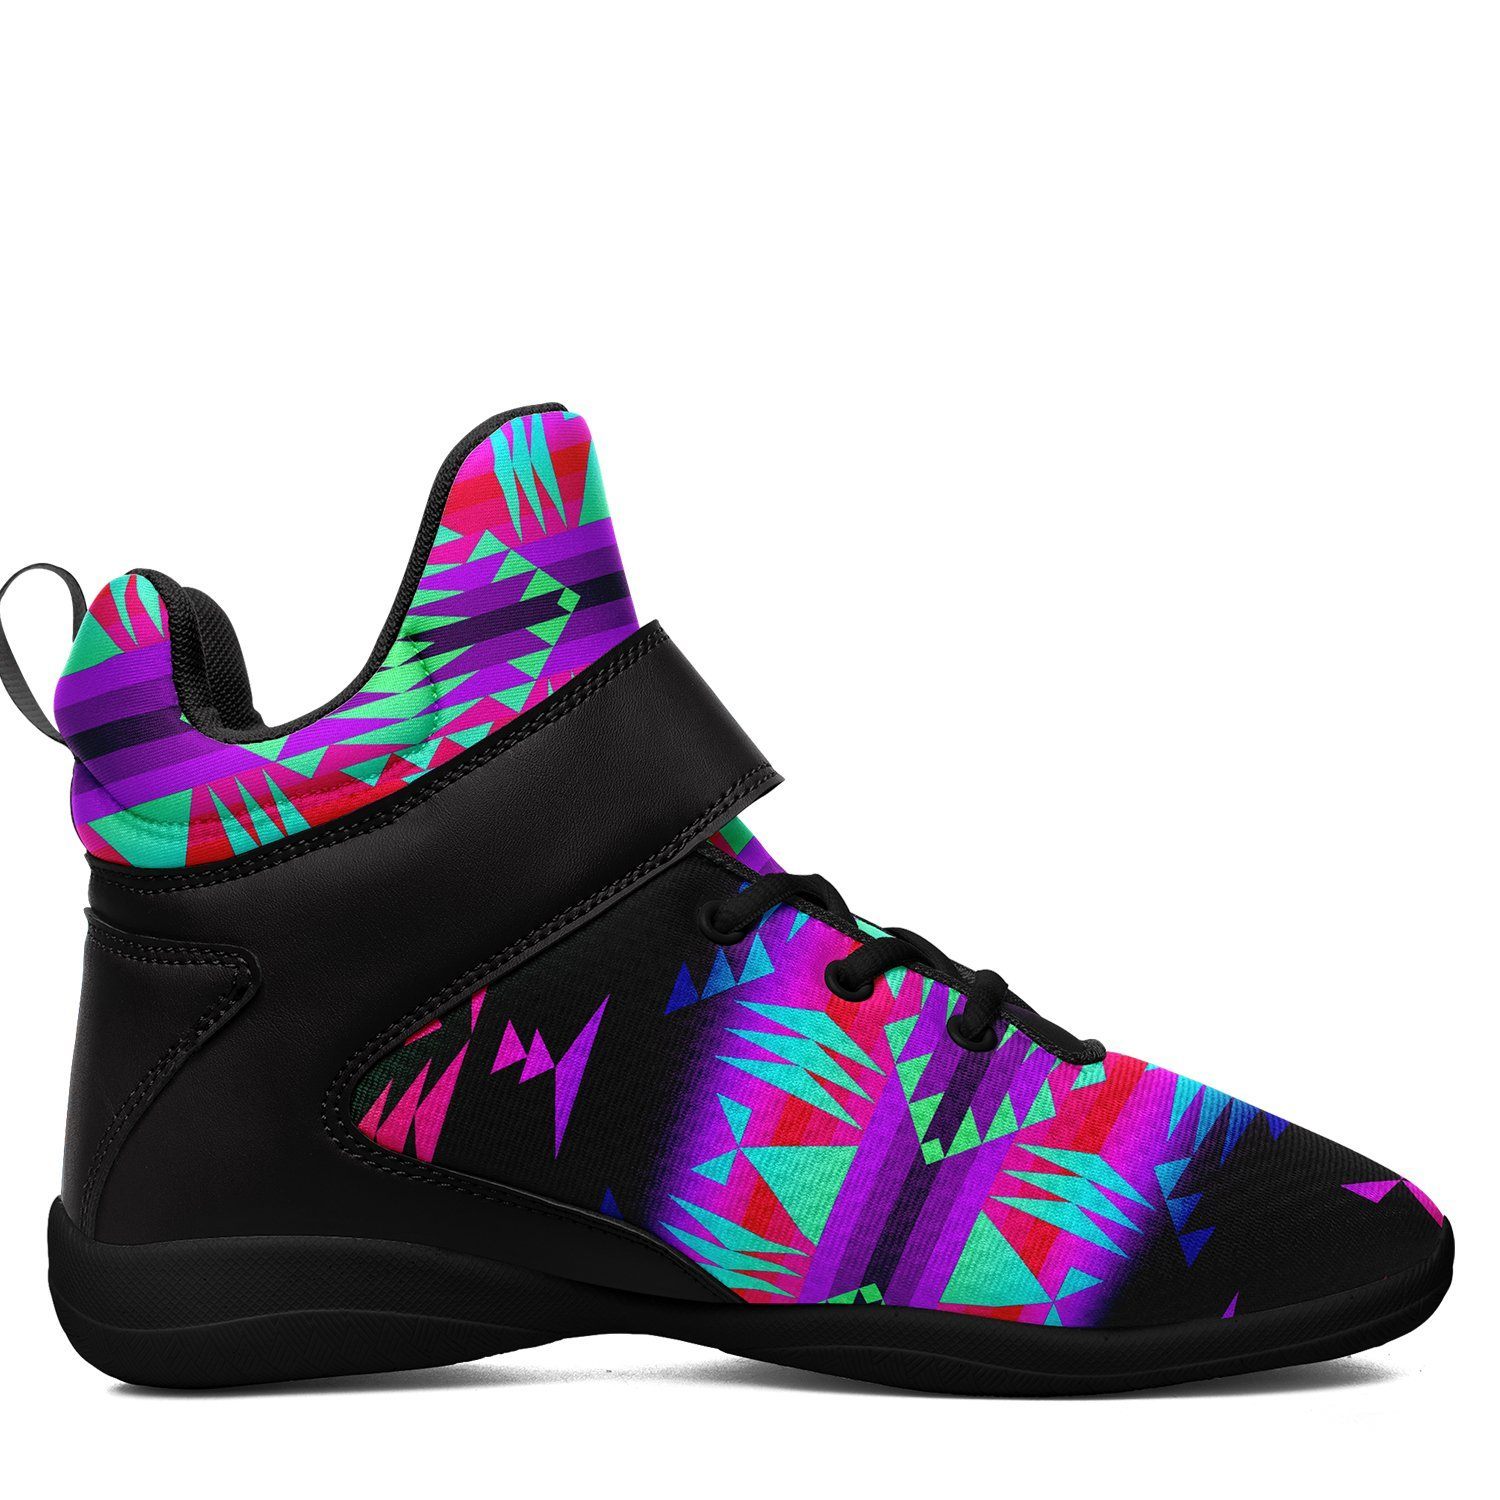 Between the Rocky Mountains Ipottaa Basketball / Sport High Top Shoes - Black Sole 49 Dzine 